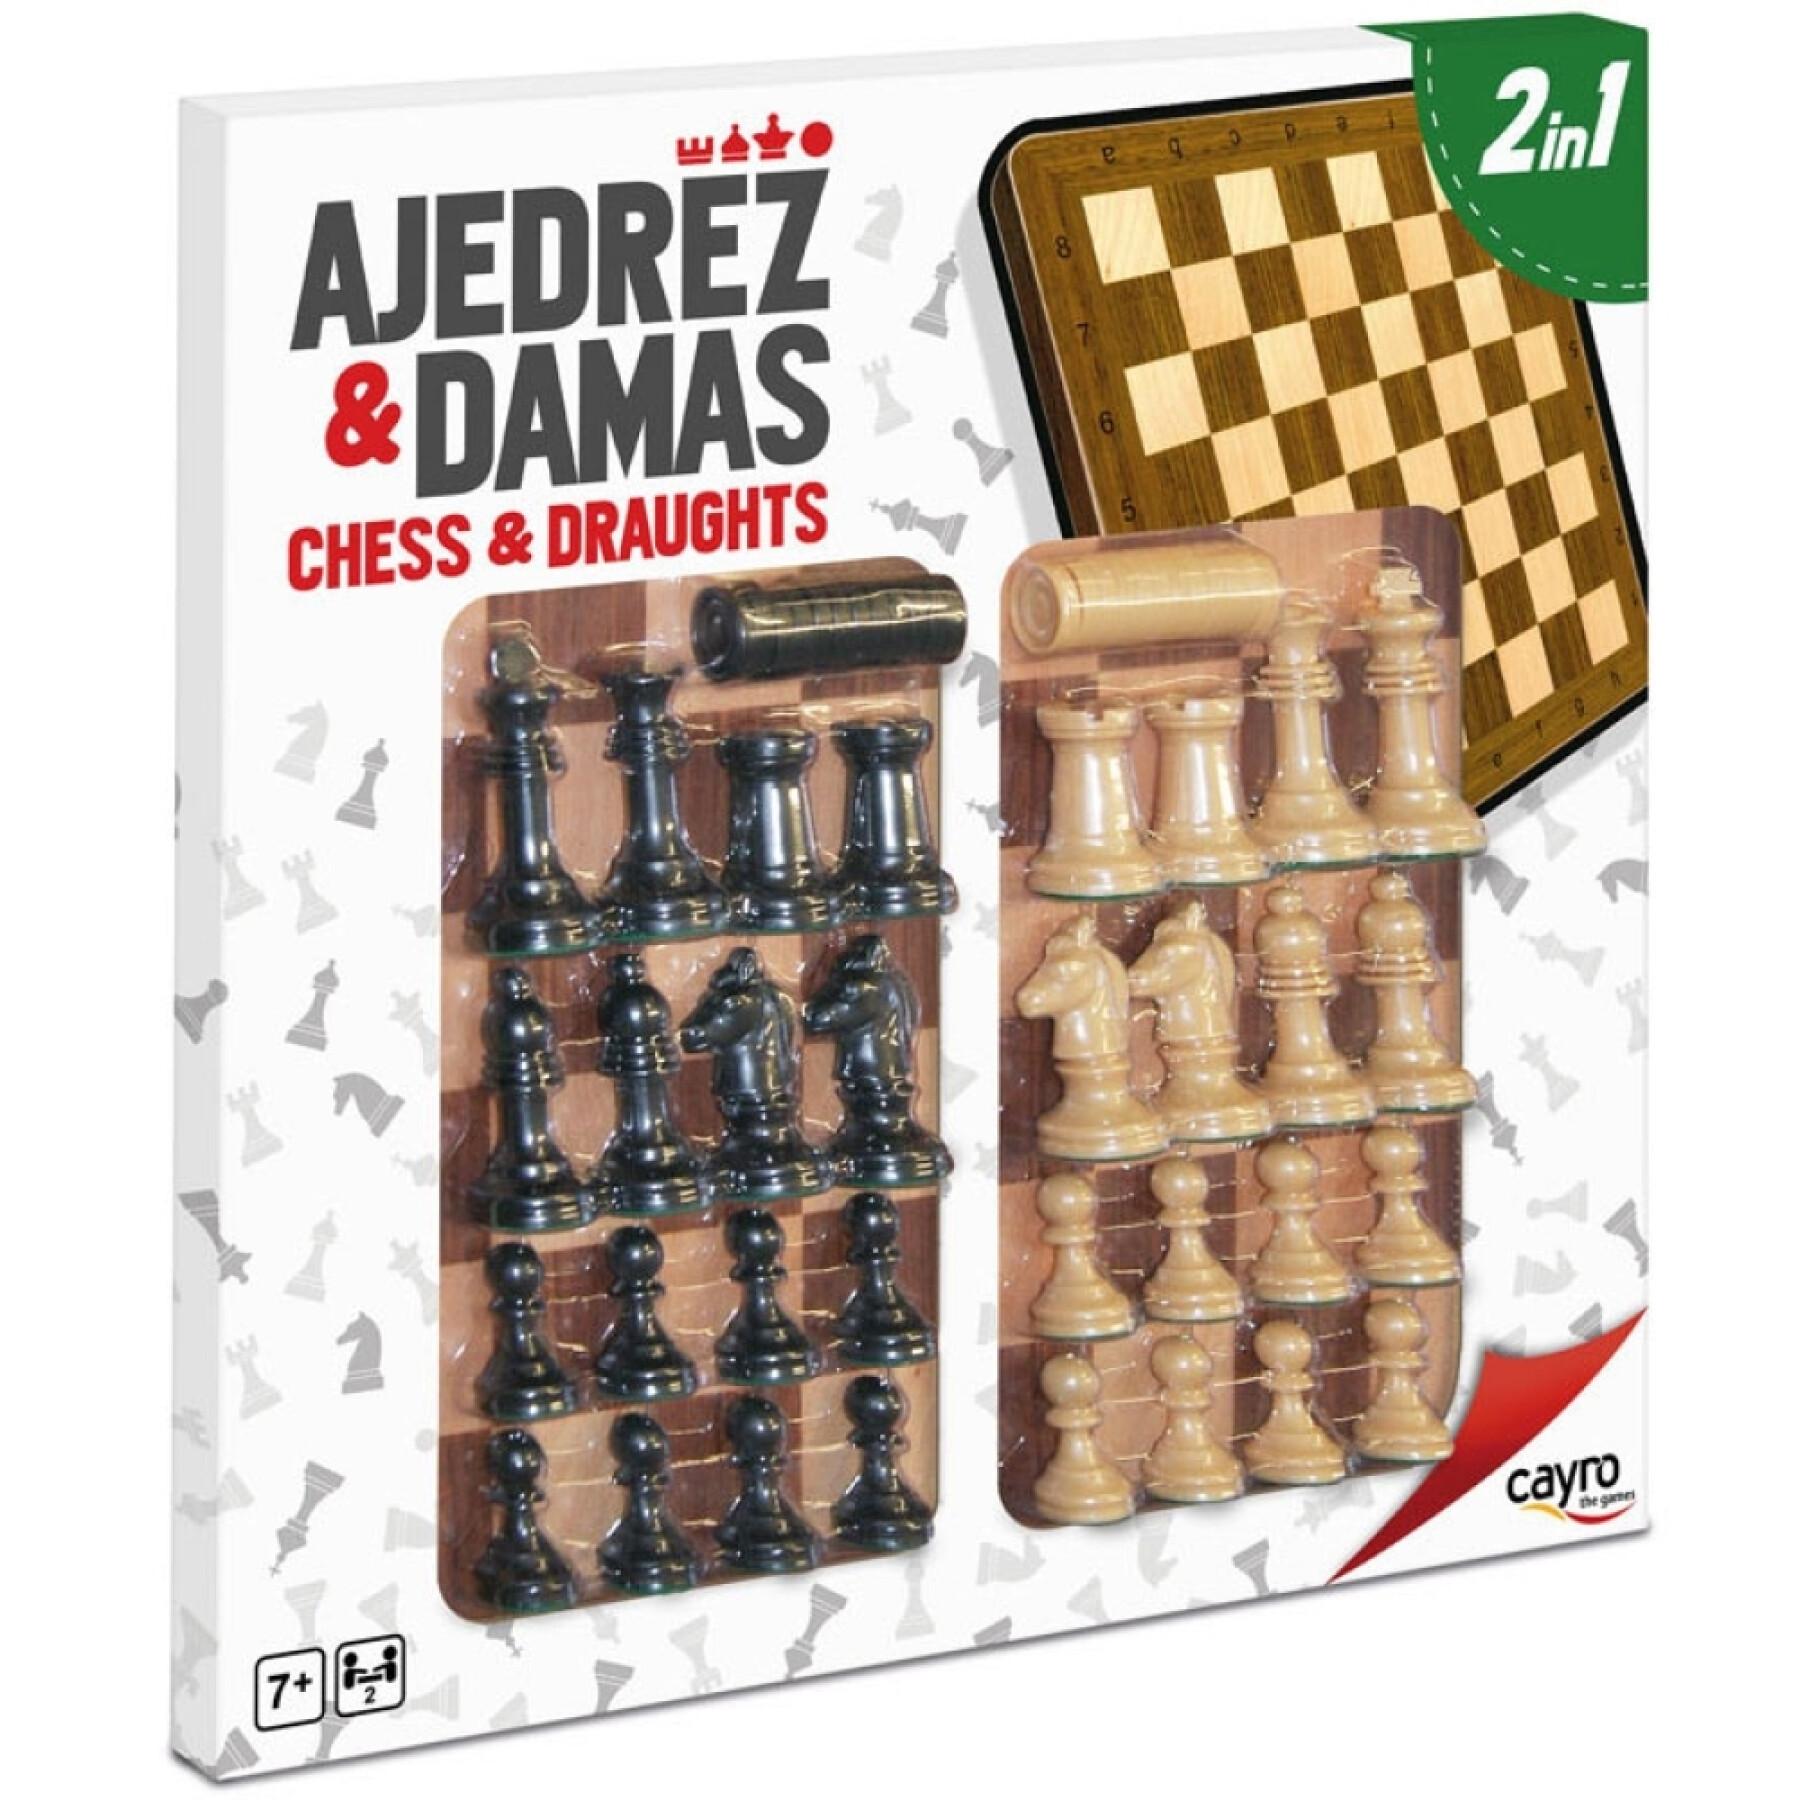 Complete wooden chess and checkers set Cayro